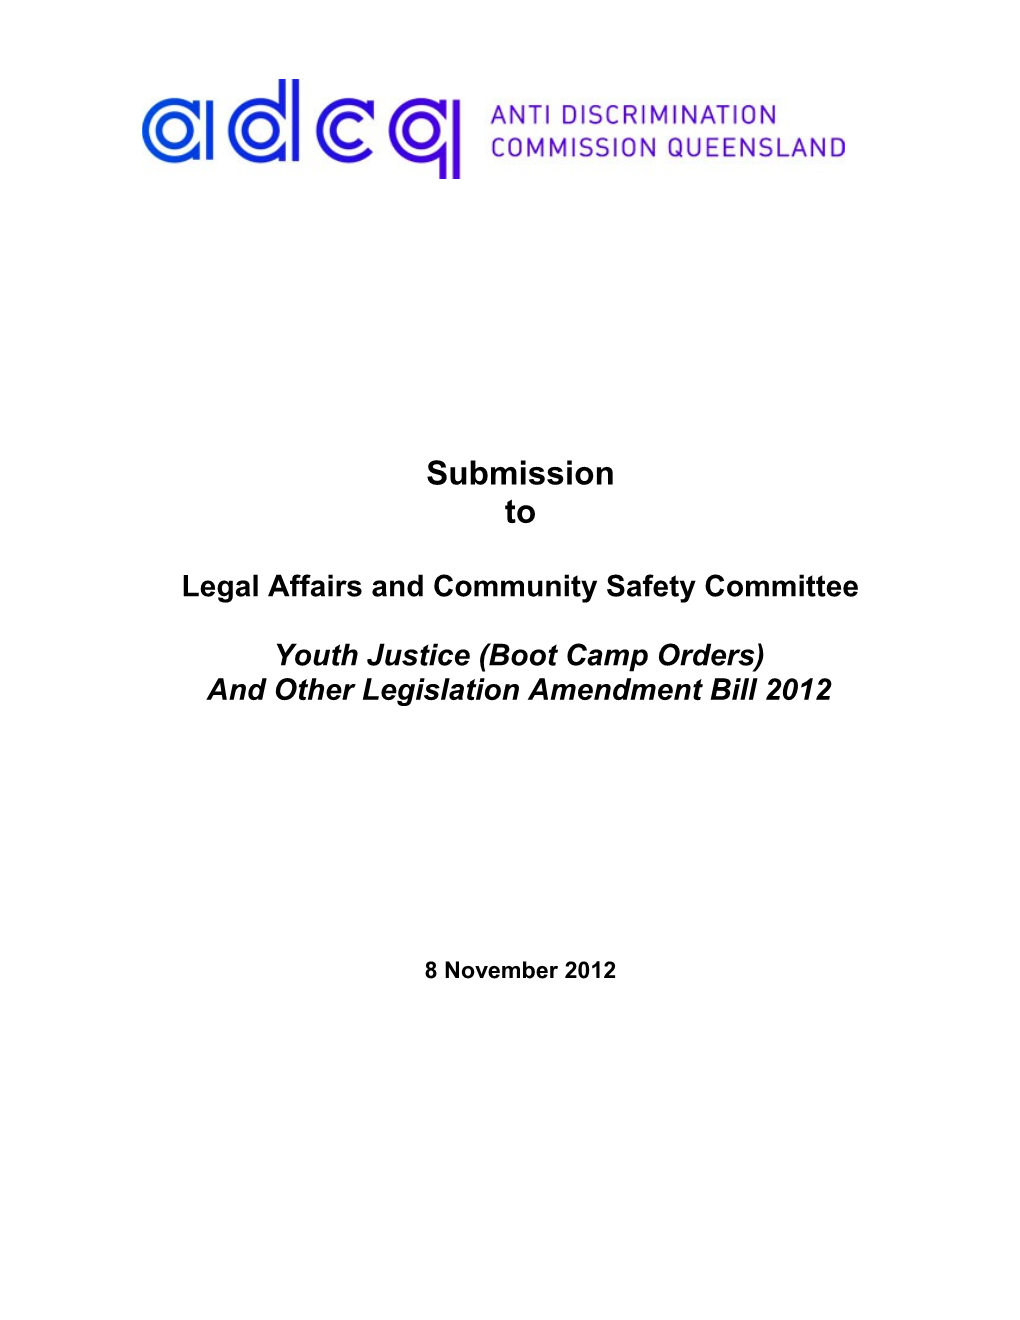 Anti-Discrimination Act 1991 Amendments Youth Justice (Boot Camp Orders) and Other Legislation